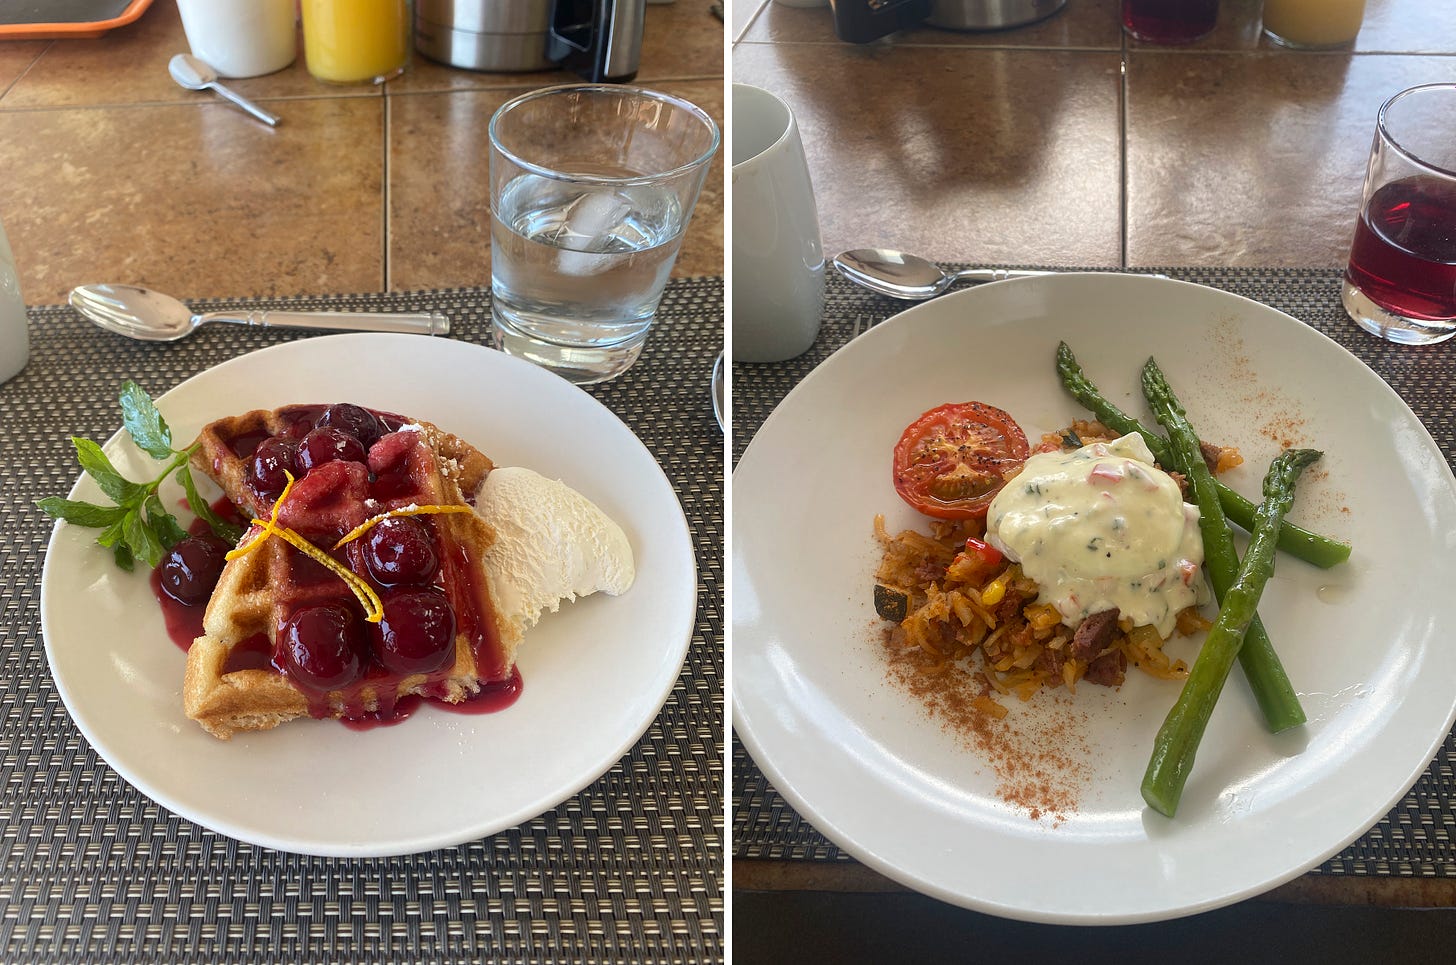 Left image: a white plate of two small waffles covered in cherry compote and garnished with a scoop of cream, orange zest, and a sprig of mint. Right image. A larger plate with a poached egg in creamy chive sauce over seasoned hash. Three pieces of asparagus and a slow-roasted tomato half are arranged on either side.